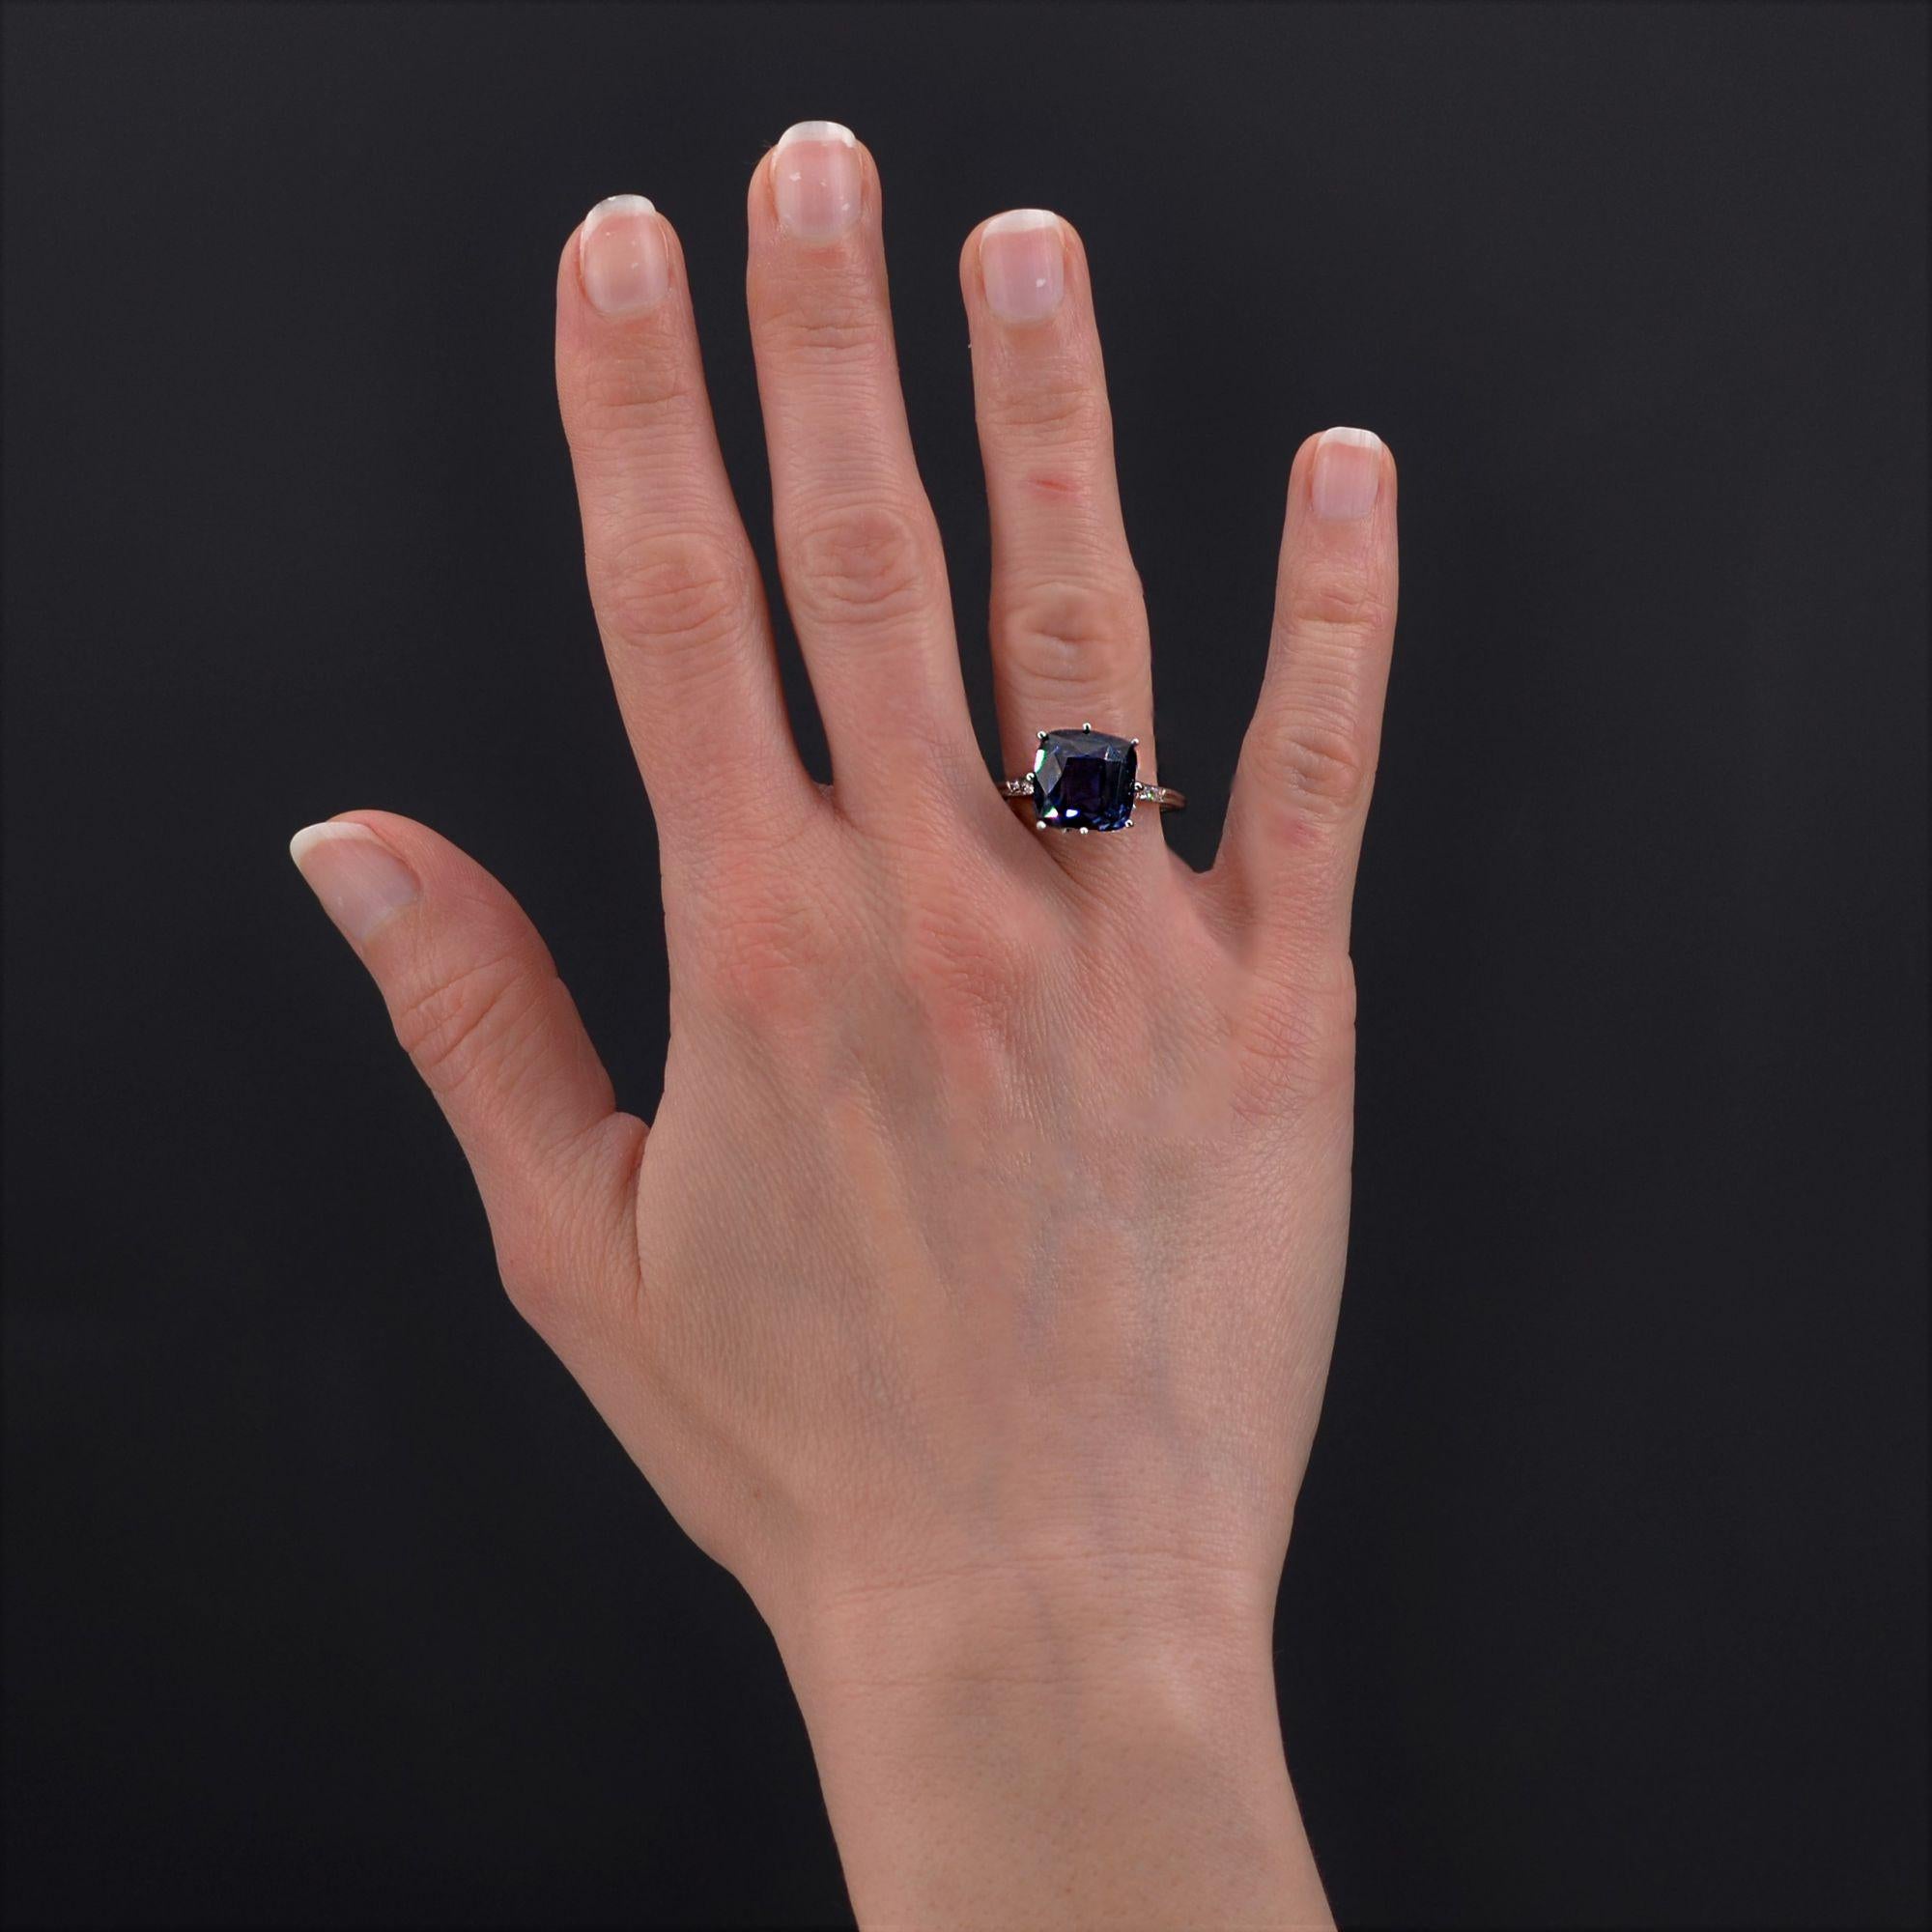 Ring in platinum ring, dog head hallmark.
Sublime and rare Art Deco ring, it is set with an intense blue cushion- cut sapphire of more than 10 carats, held in claws. The basket is openwork, art deco style, and the start of the ring on both sides is